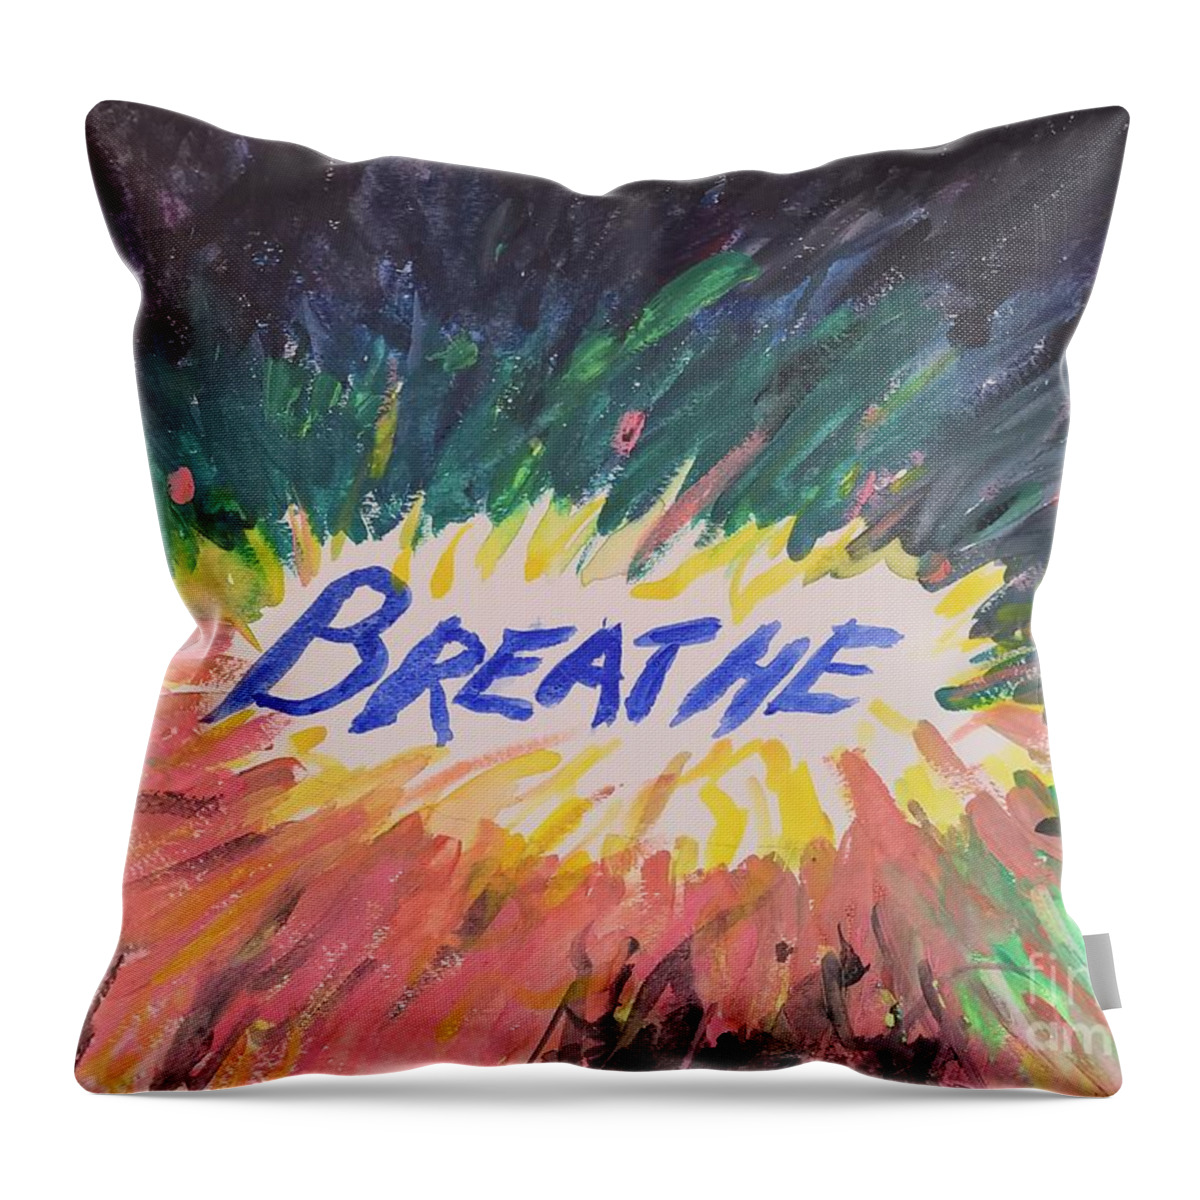 Breathe Throw Pillow featuring the painting Breathe by Jane H Conti